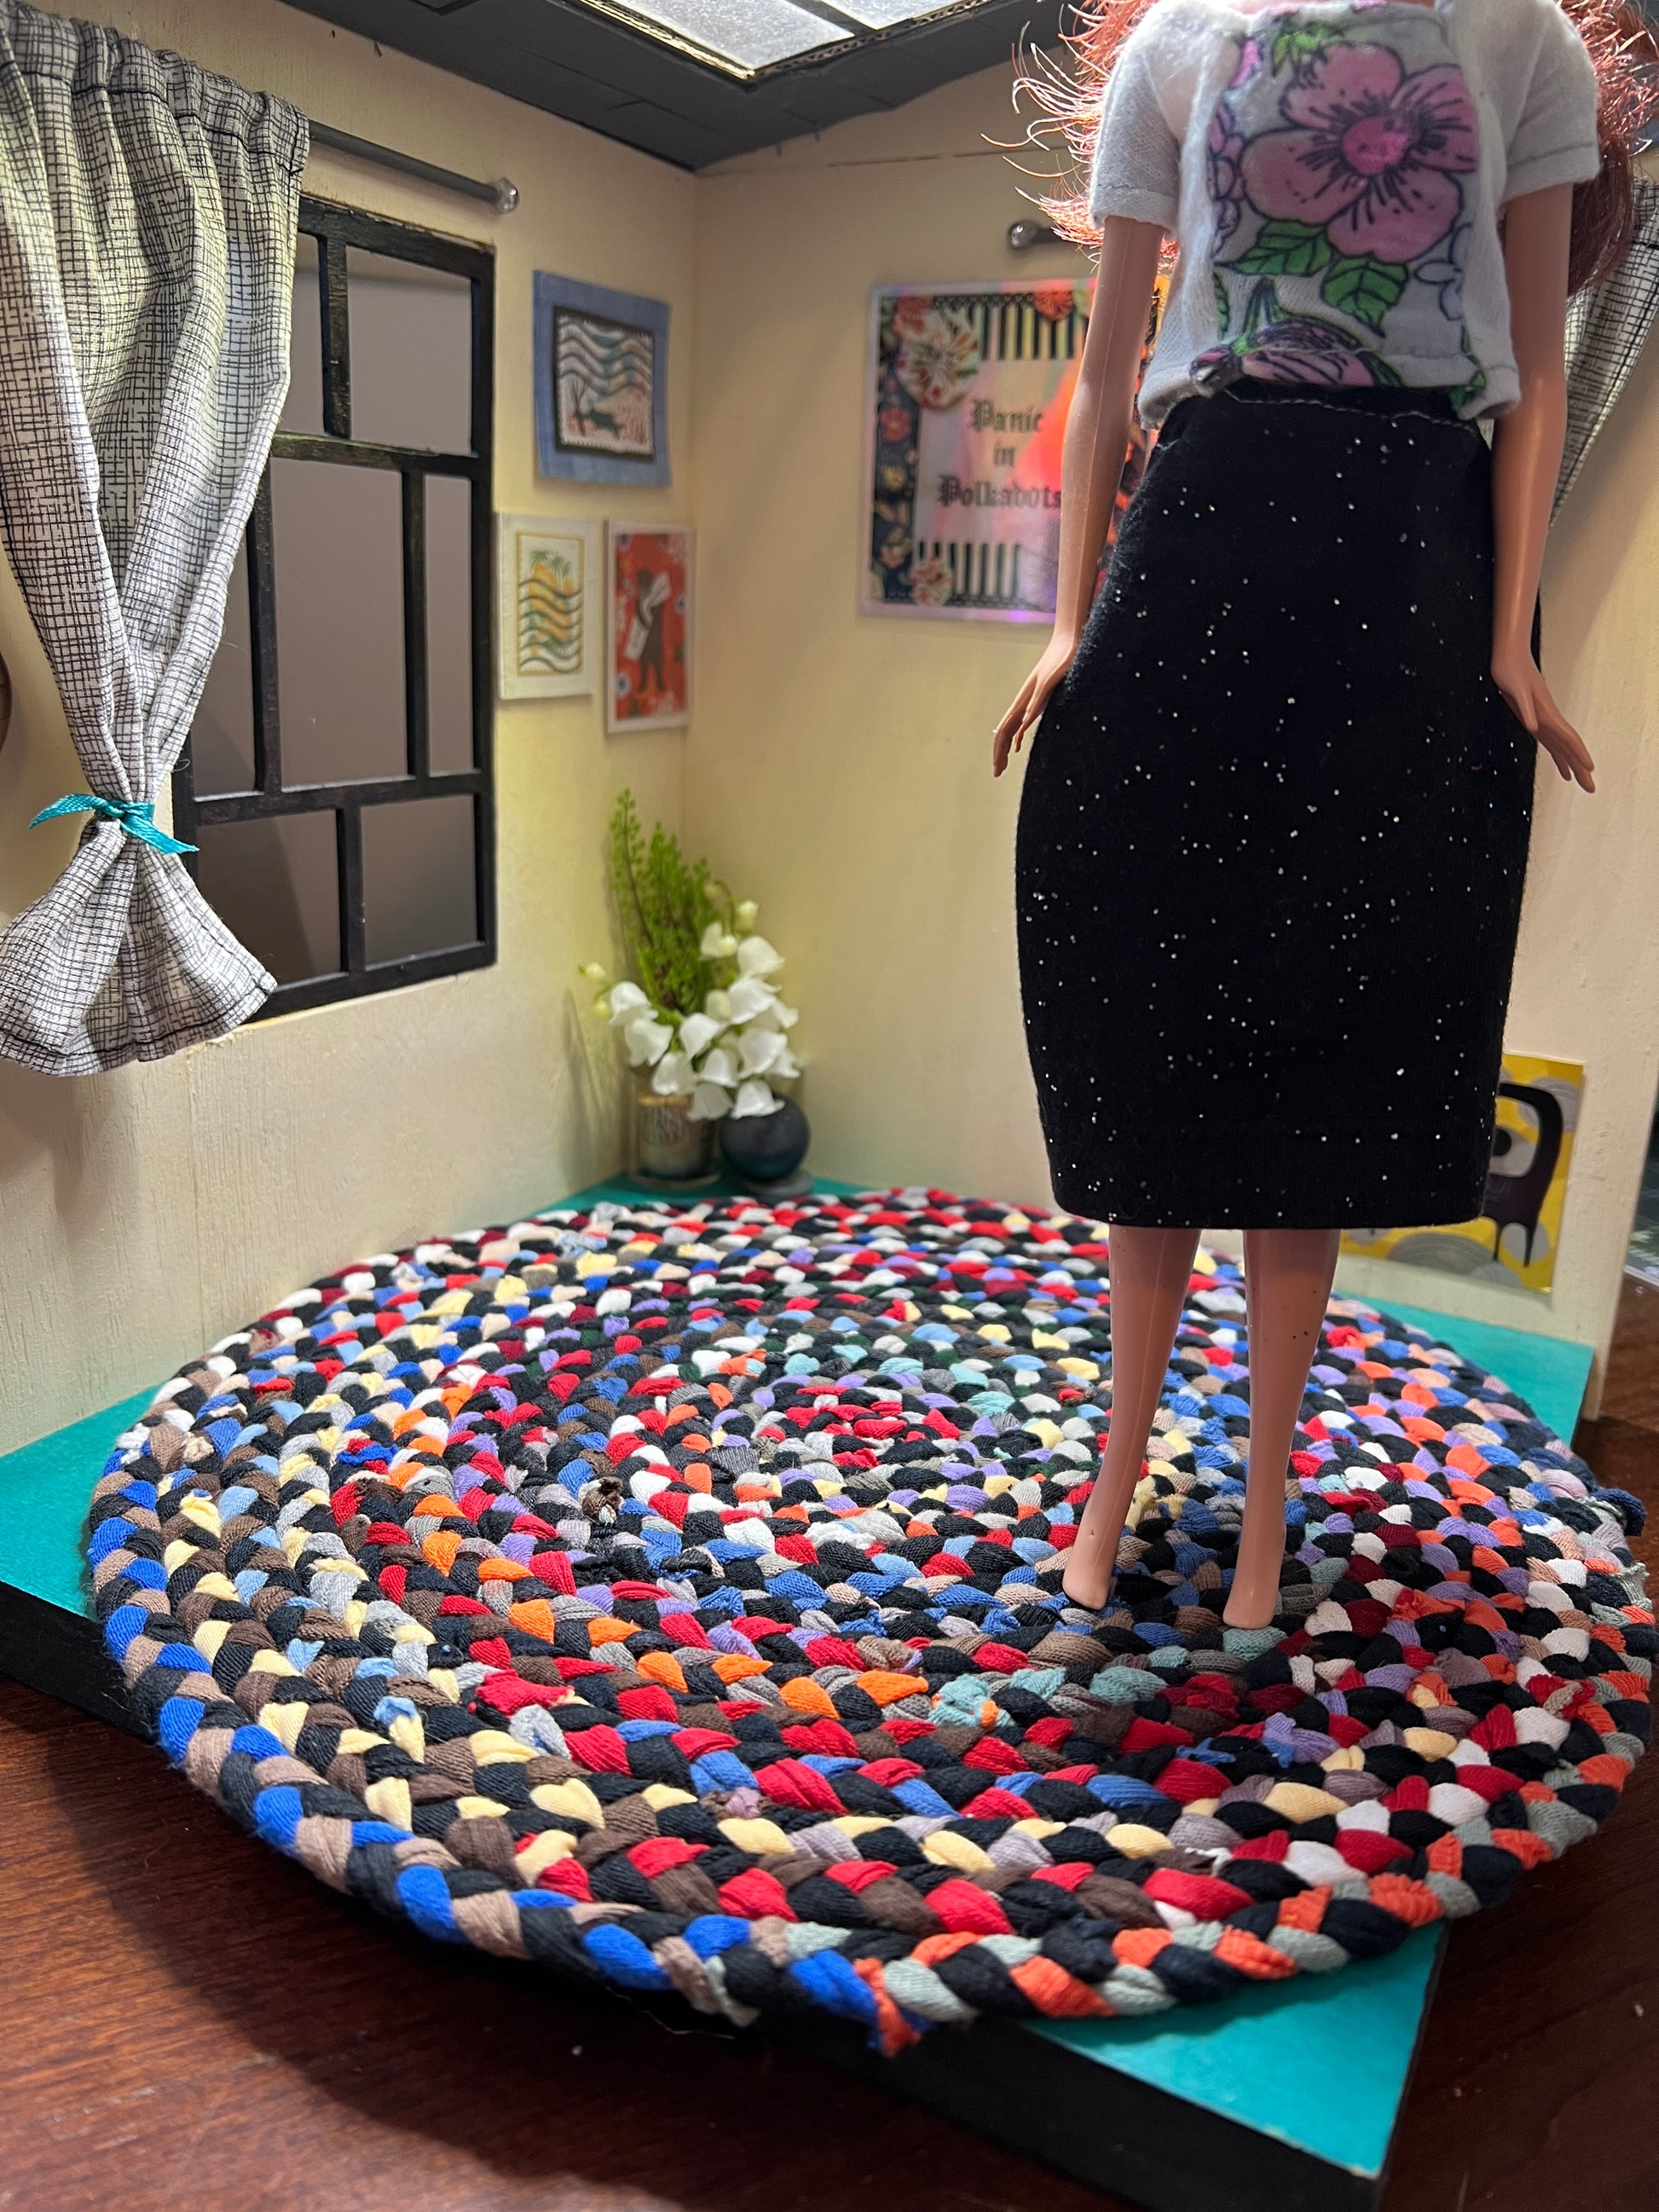 view of miniature rug in a room box, with Barbie standing atop the 11" retro rainbow rug for scale and display ideas